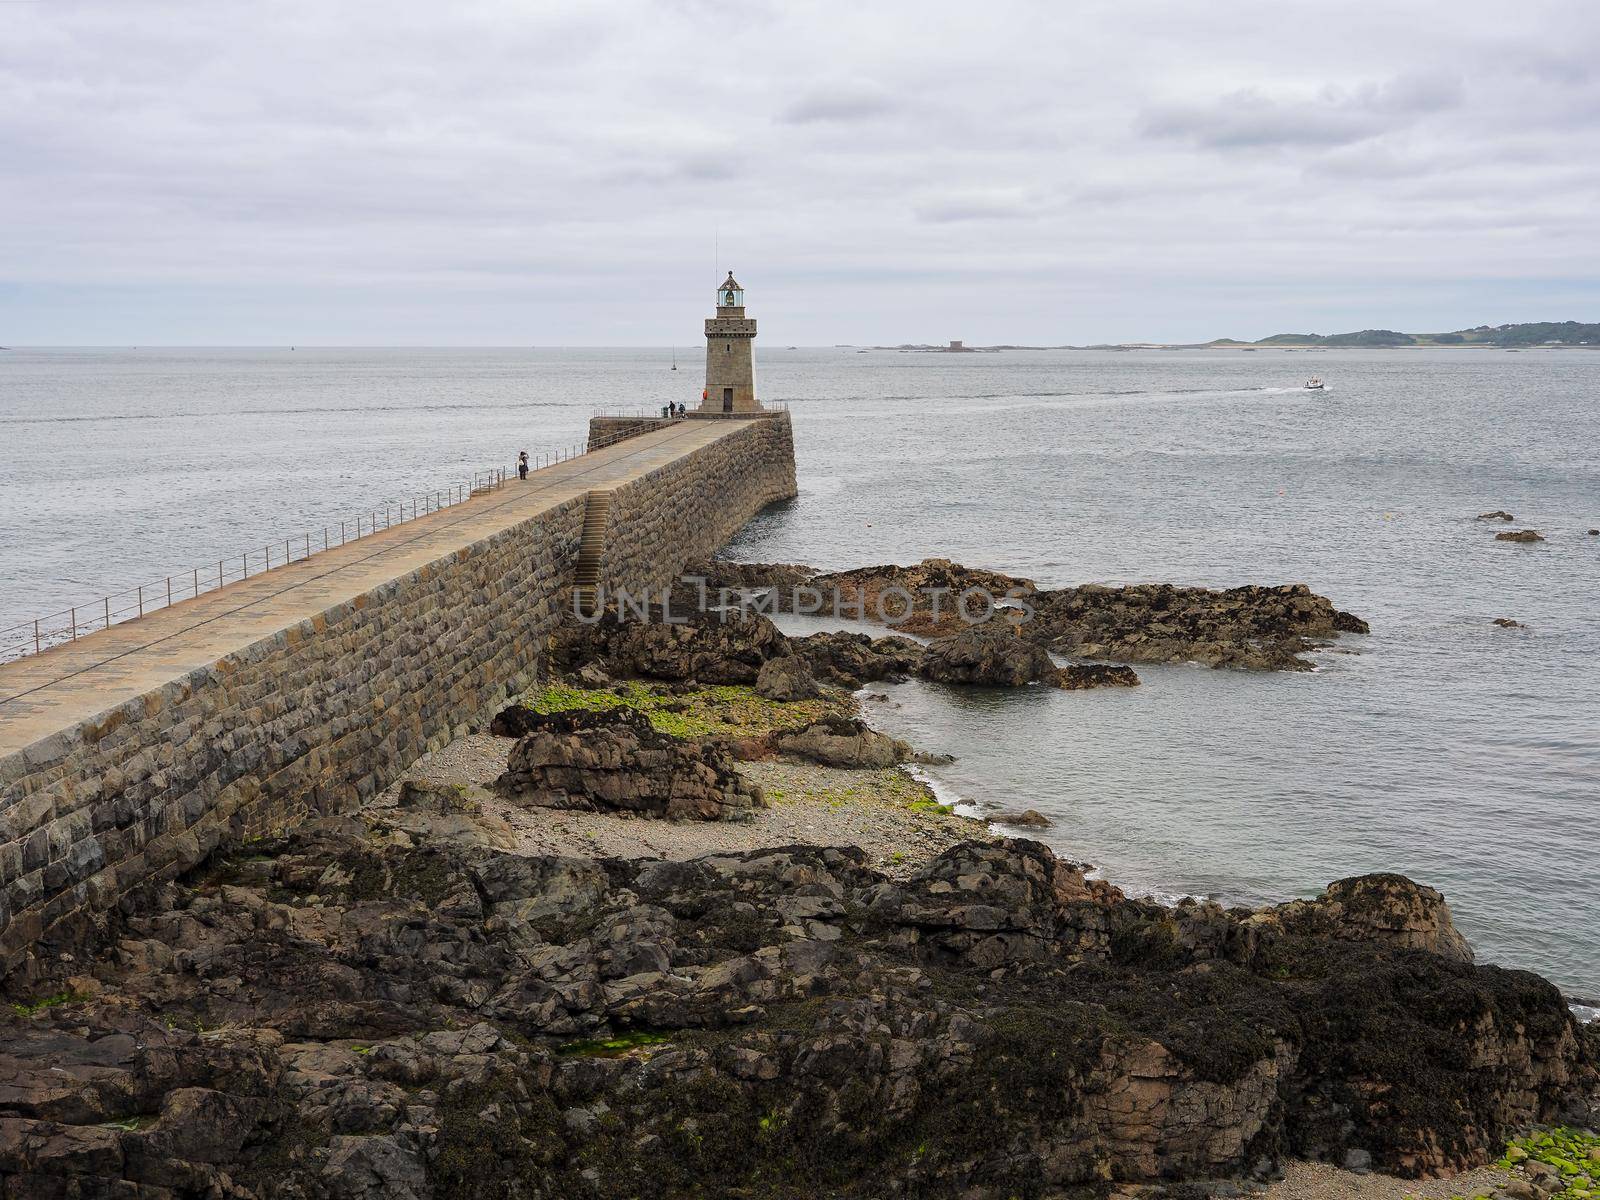 View to Castle Breakwater Lighthouse, St Peter Port, Guernsey, Channel Islands by PhilHarland